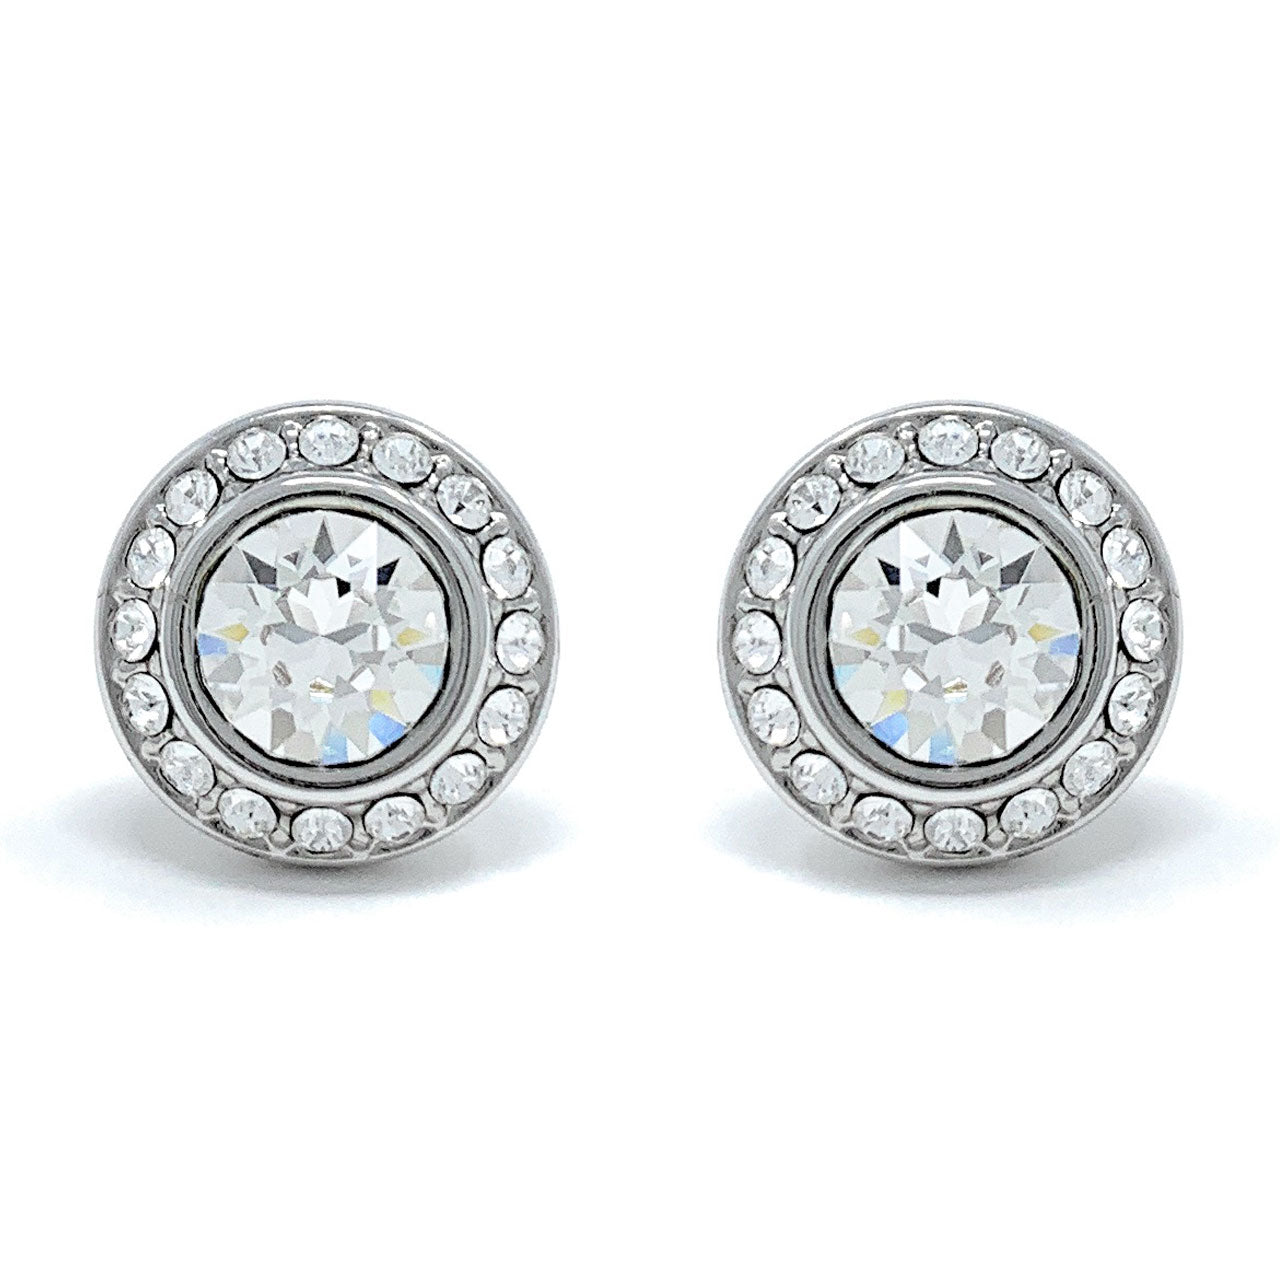 Halo Pave Stud Earrings with White Clear Round Crystals from Swarovski Silver Toned Rhodium Plated - Ed Heart